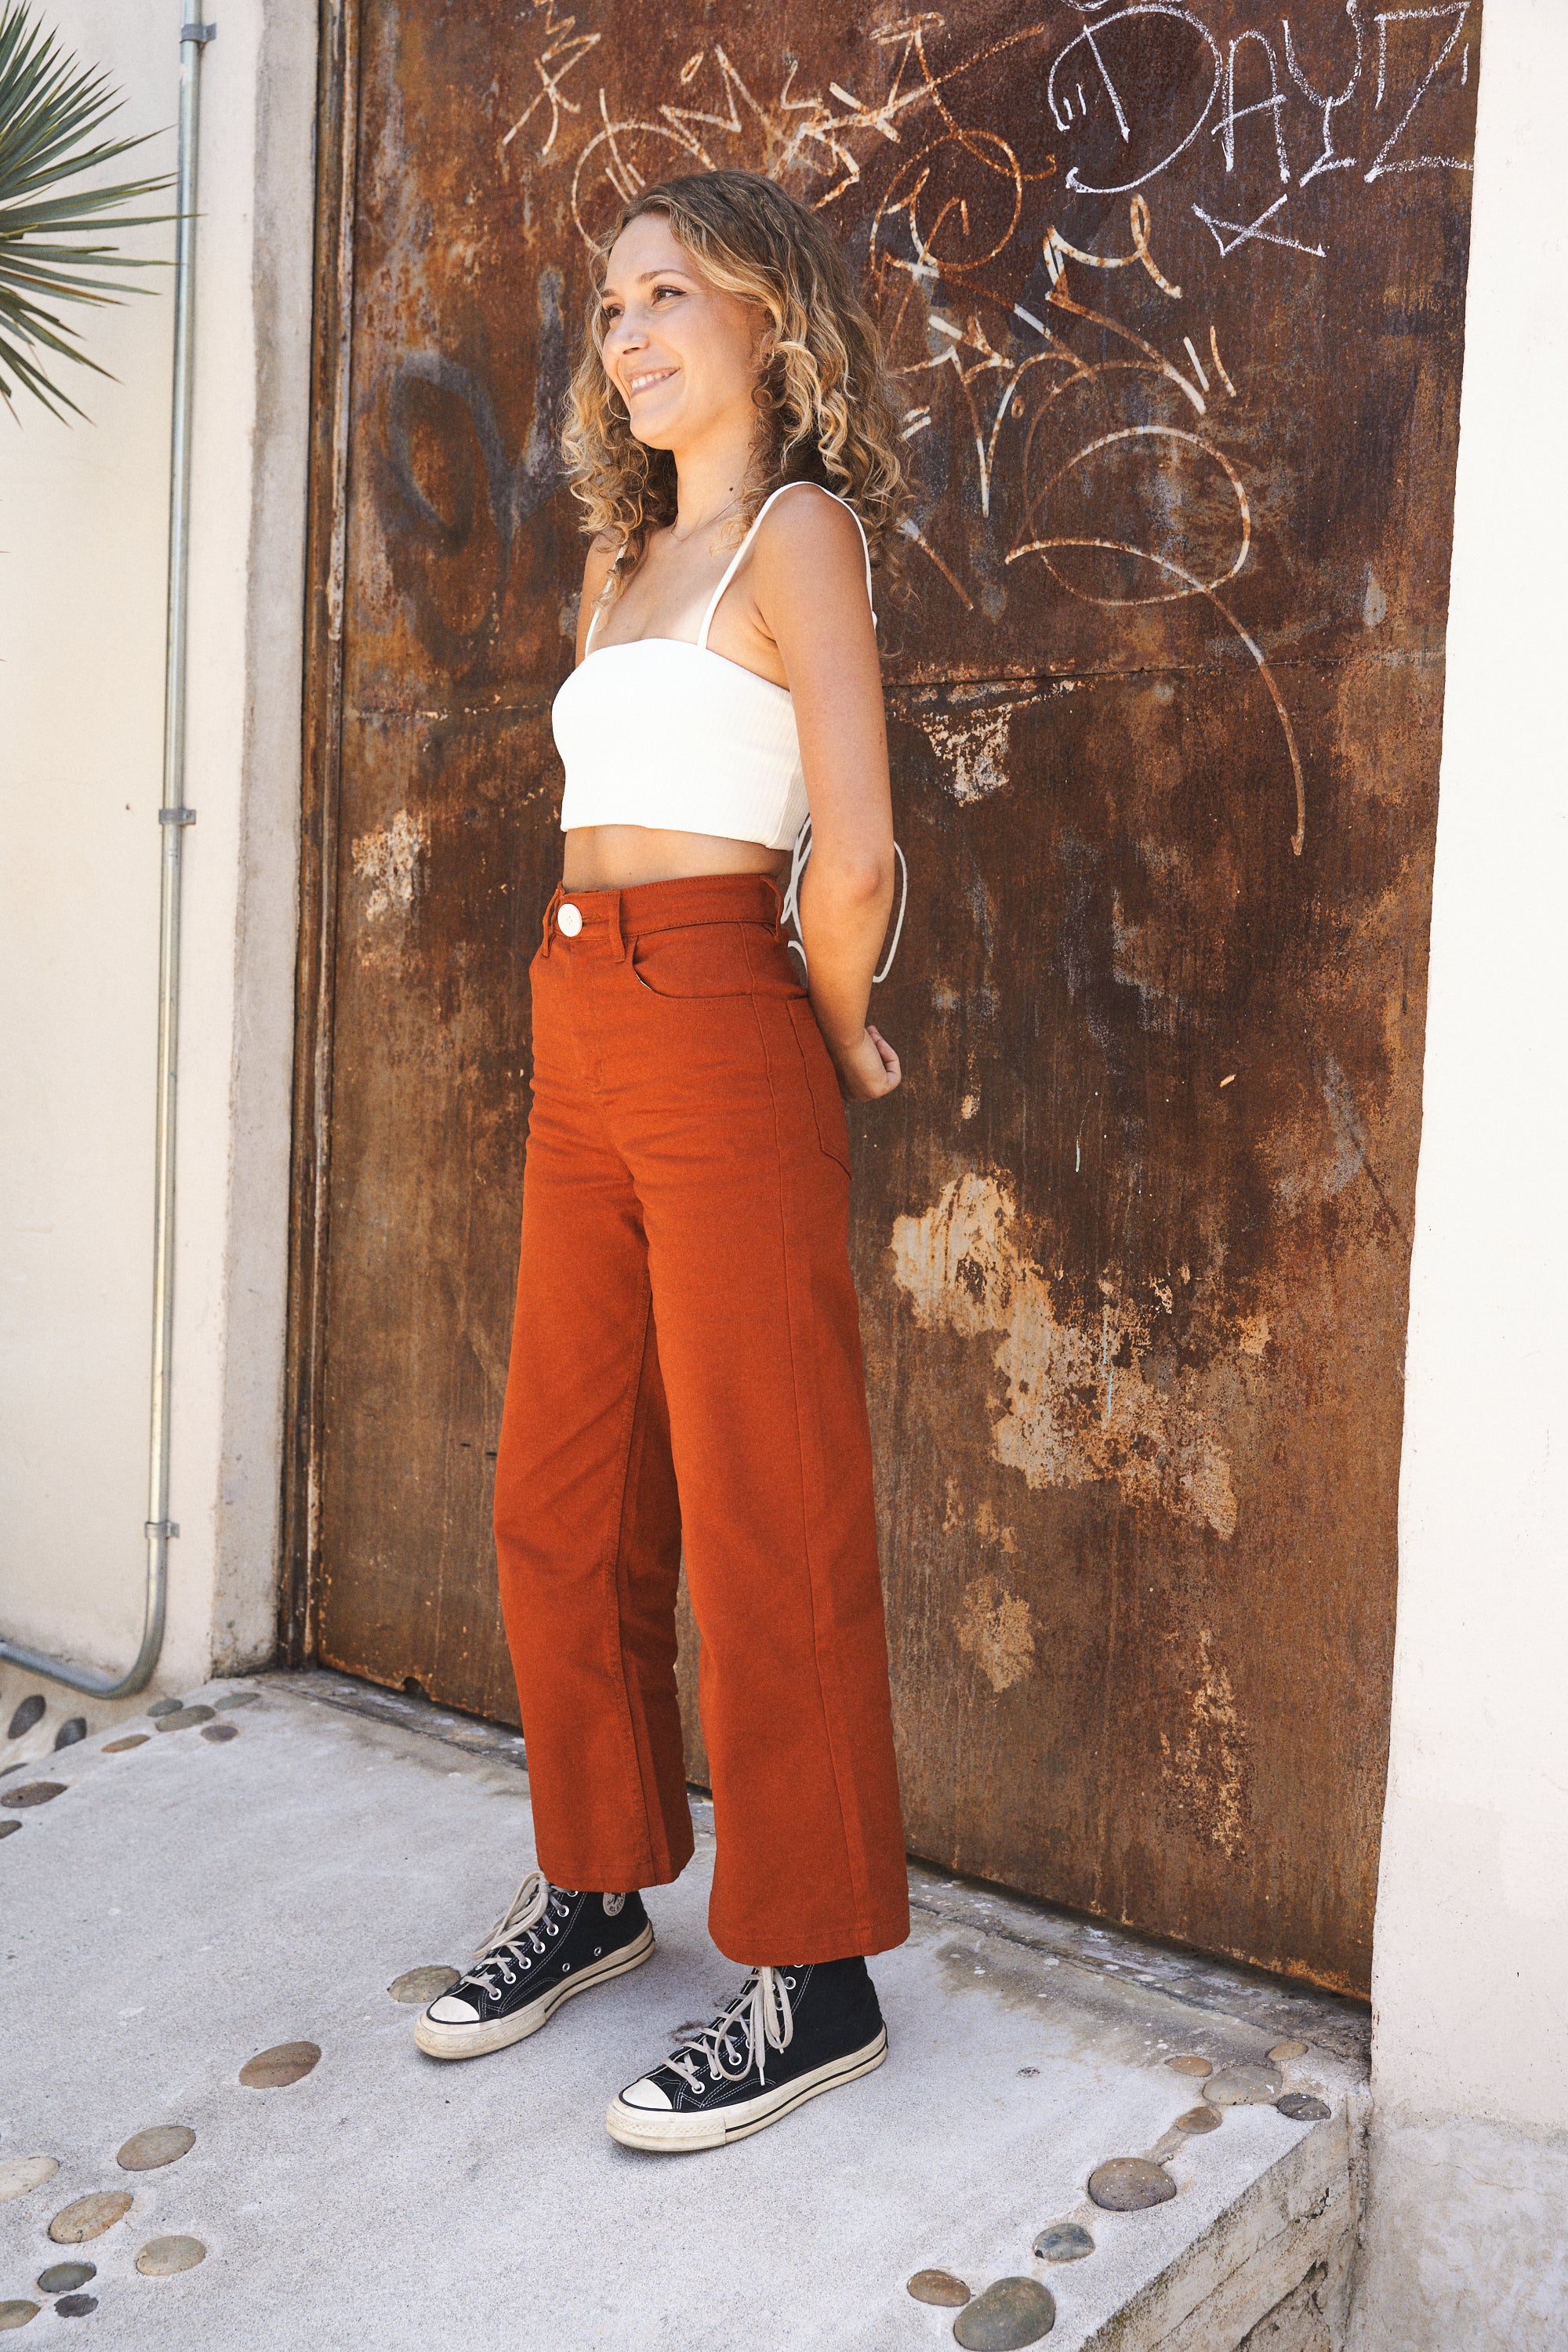 Bare Classic 7/8 Pant - Rust Brown (50% OFF!) – Flexliving